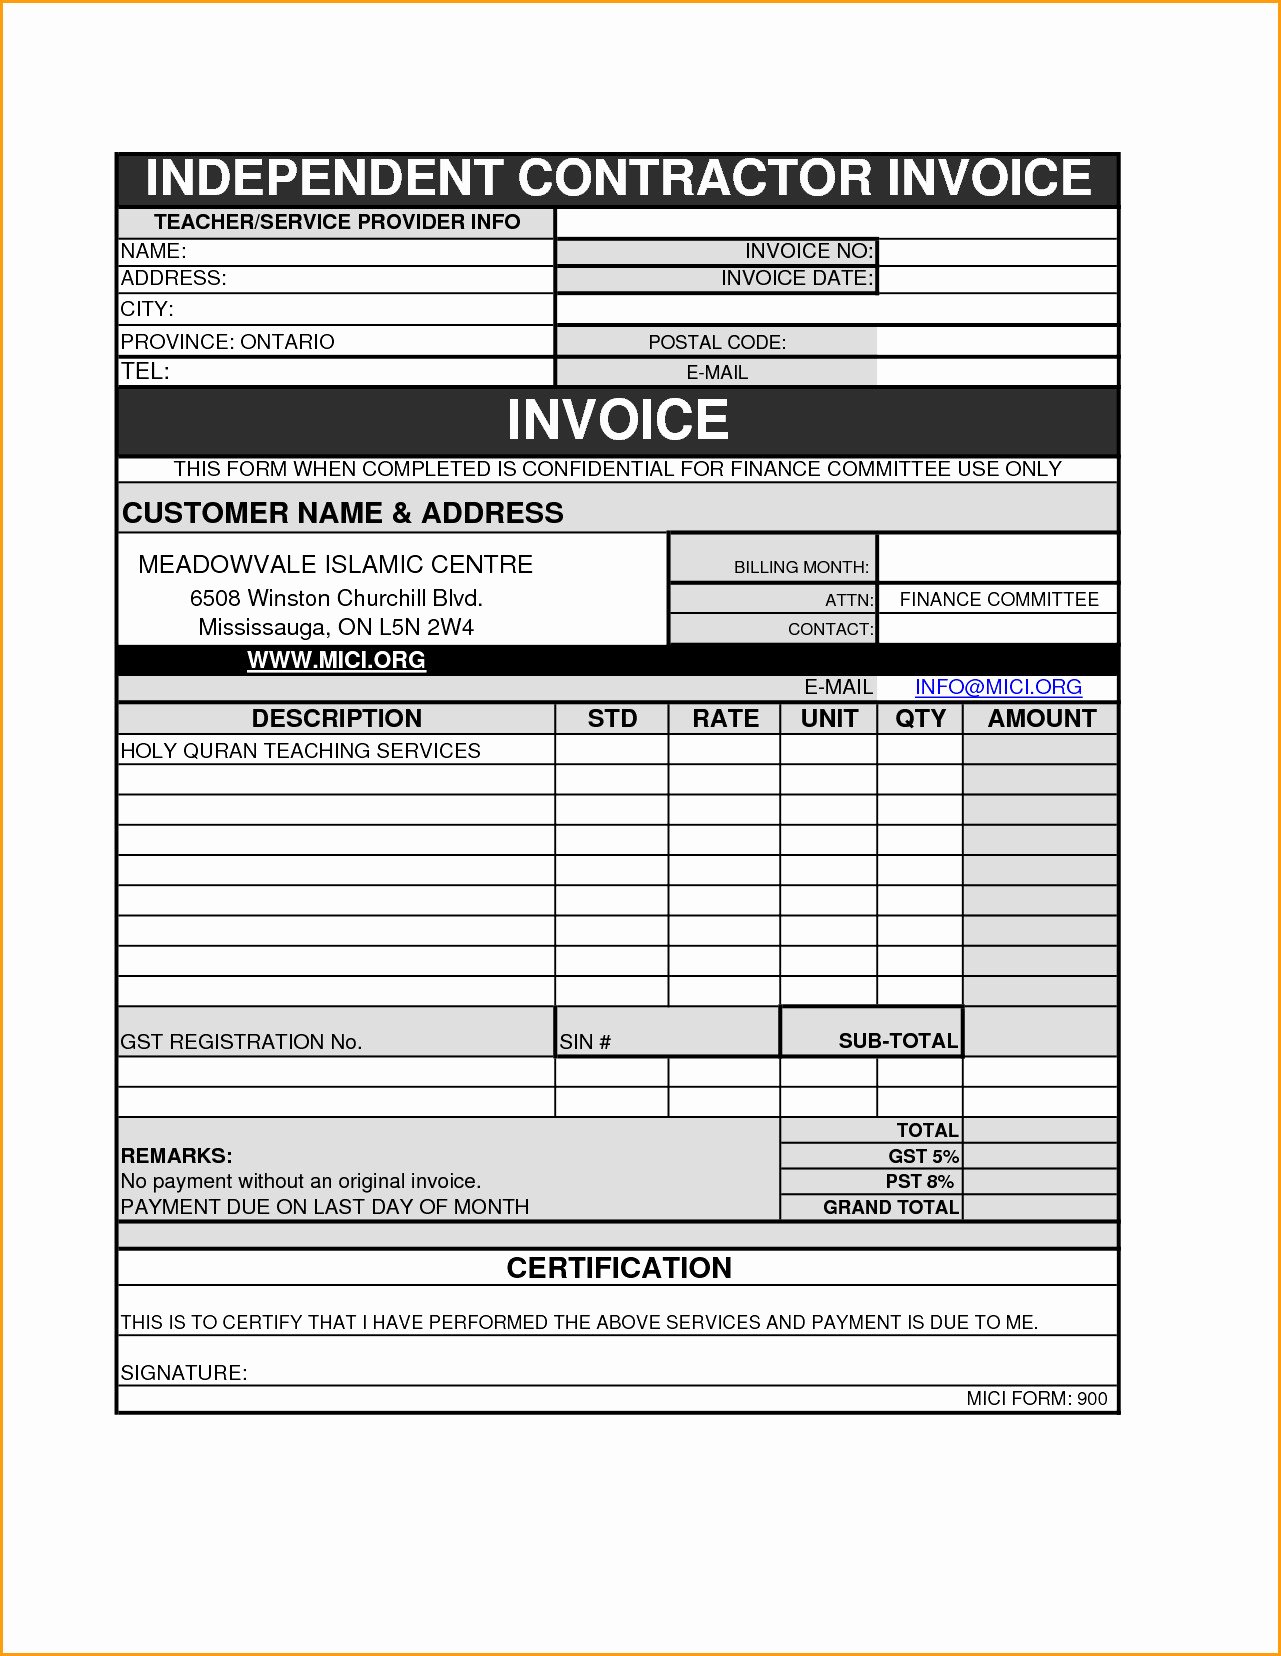 Independent Contractor Invoice Template Excel Lovely Independent Contractor Invoice Template Excel – Bushveld Lab